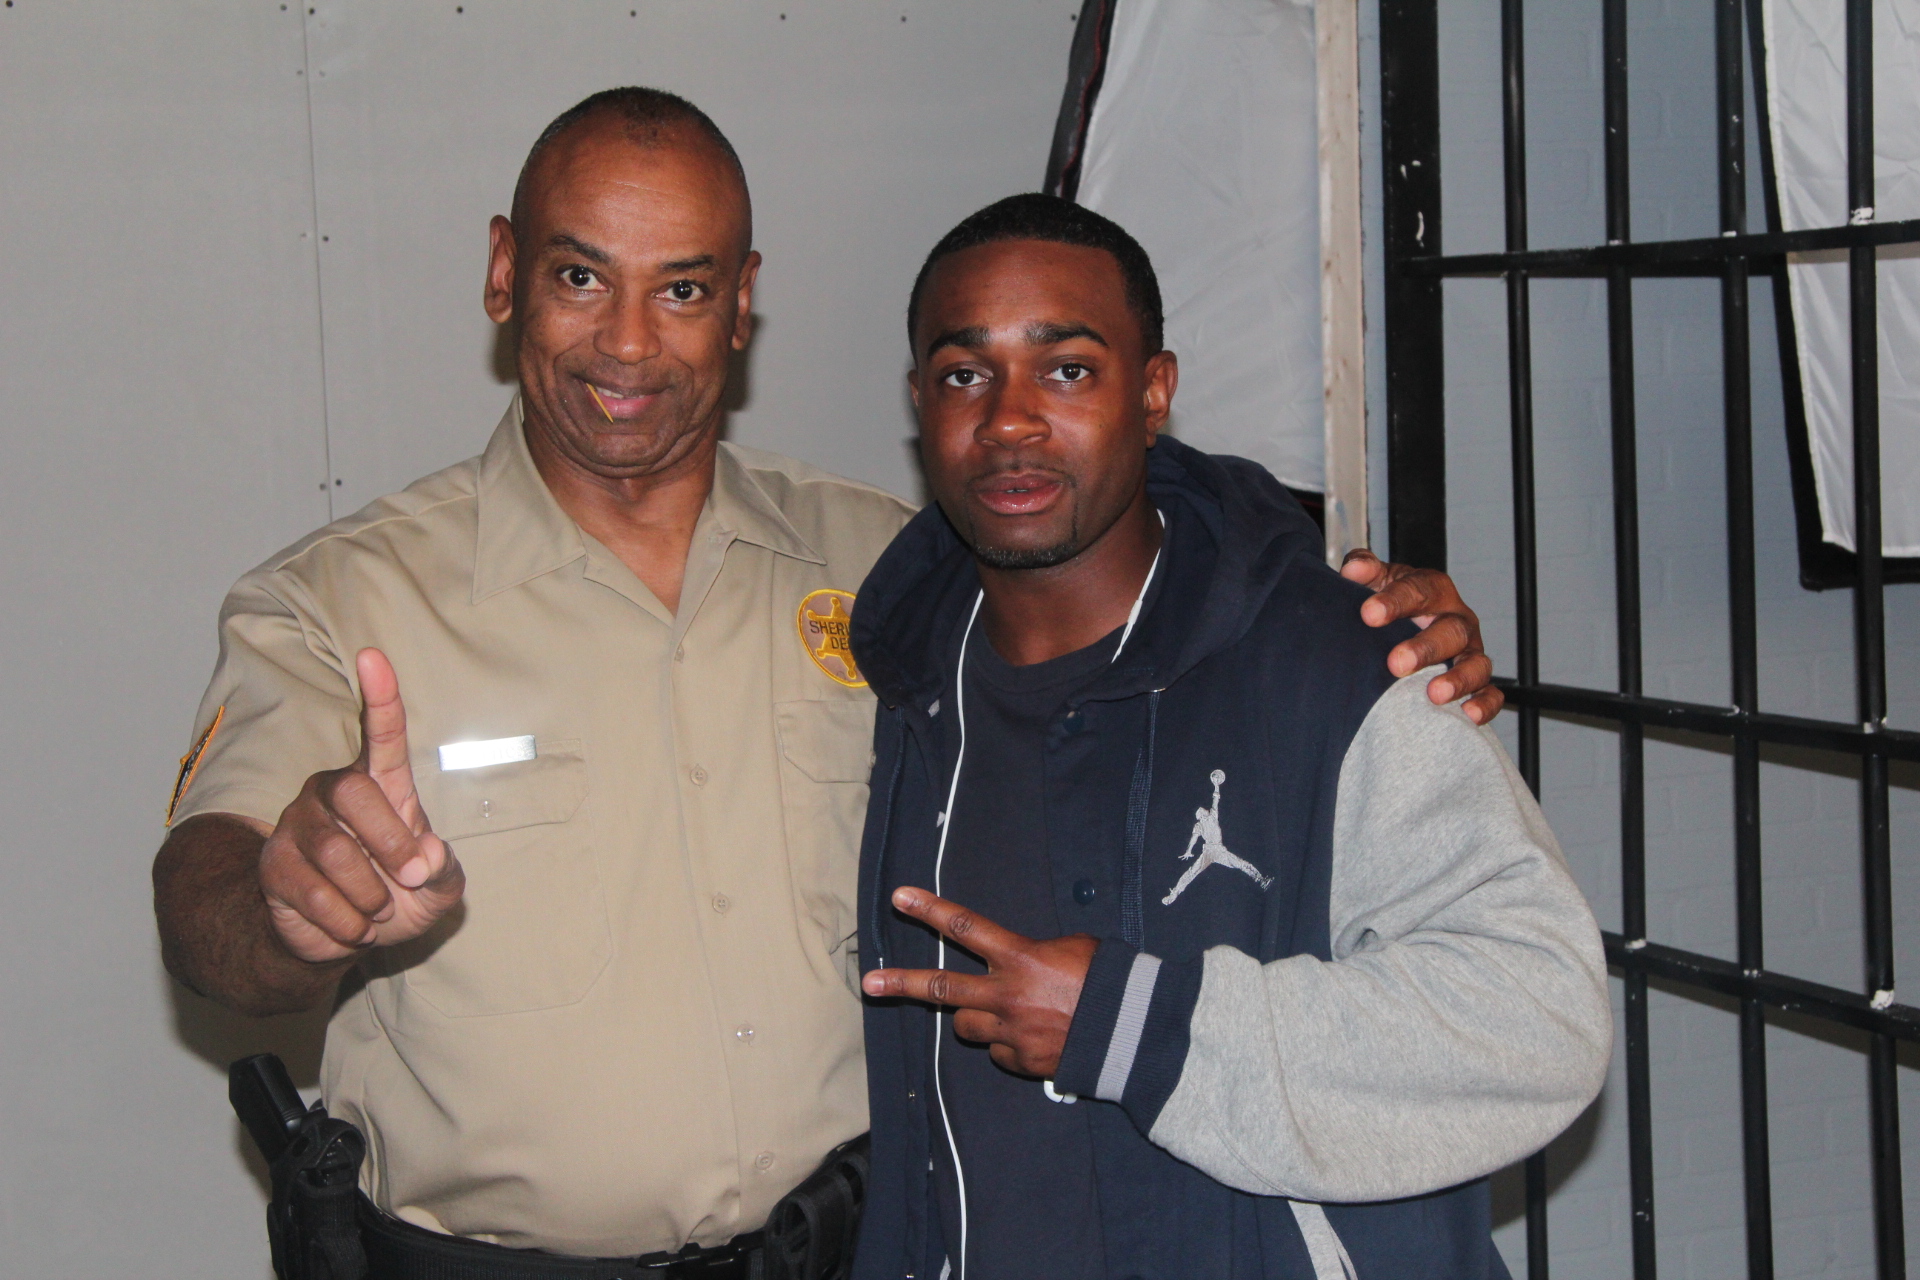 On the set of Premeditated. Louis C. Robins, Micah Robinson